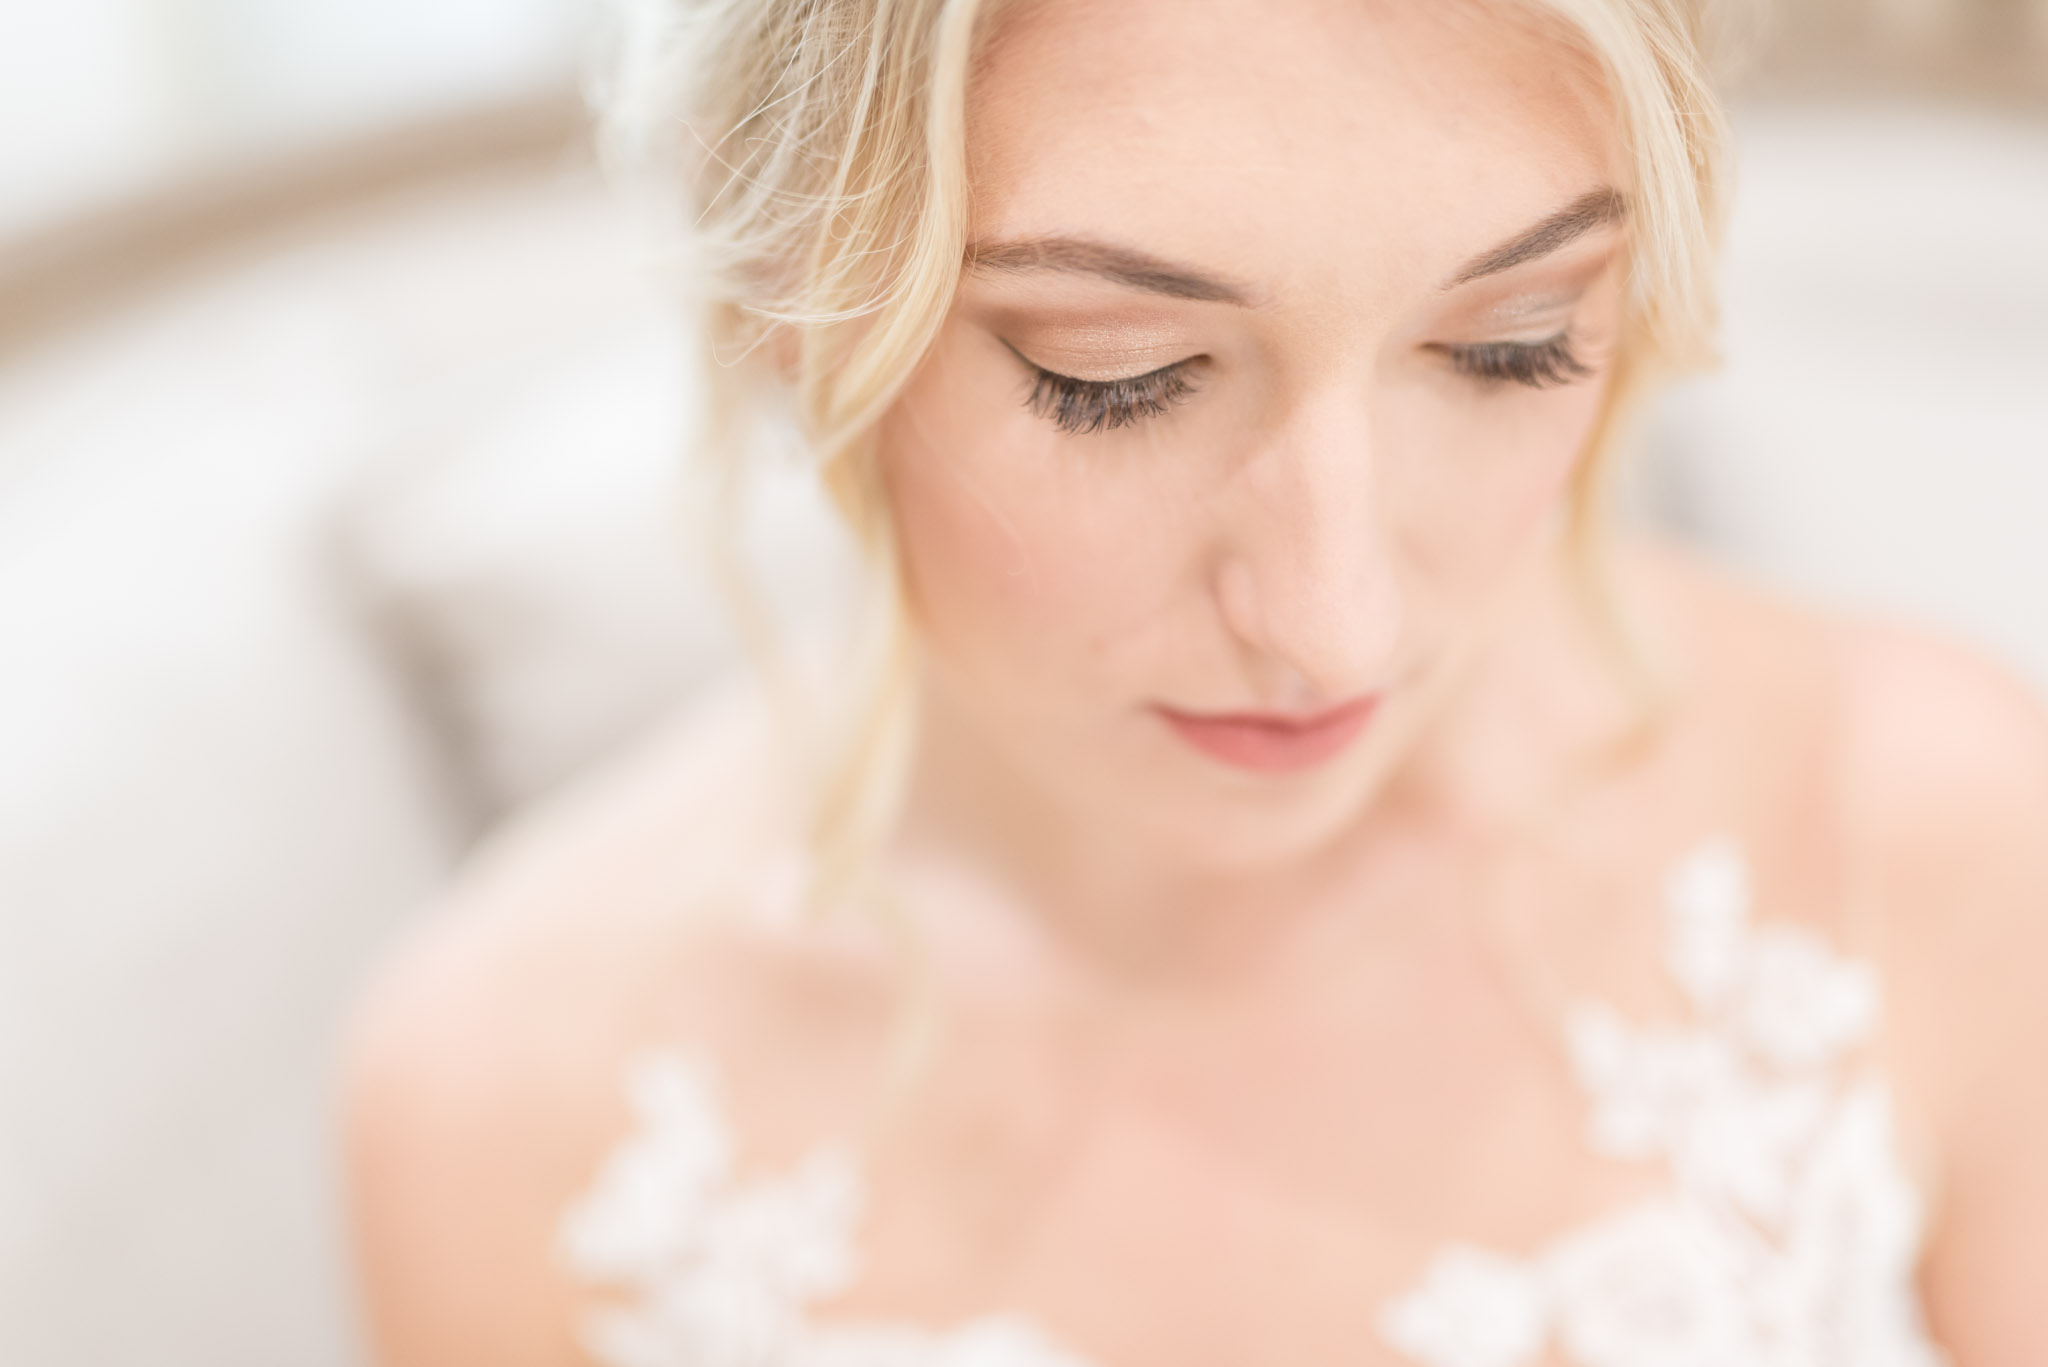 Bride looks down for close up image.